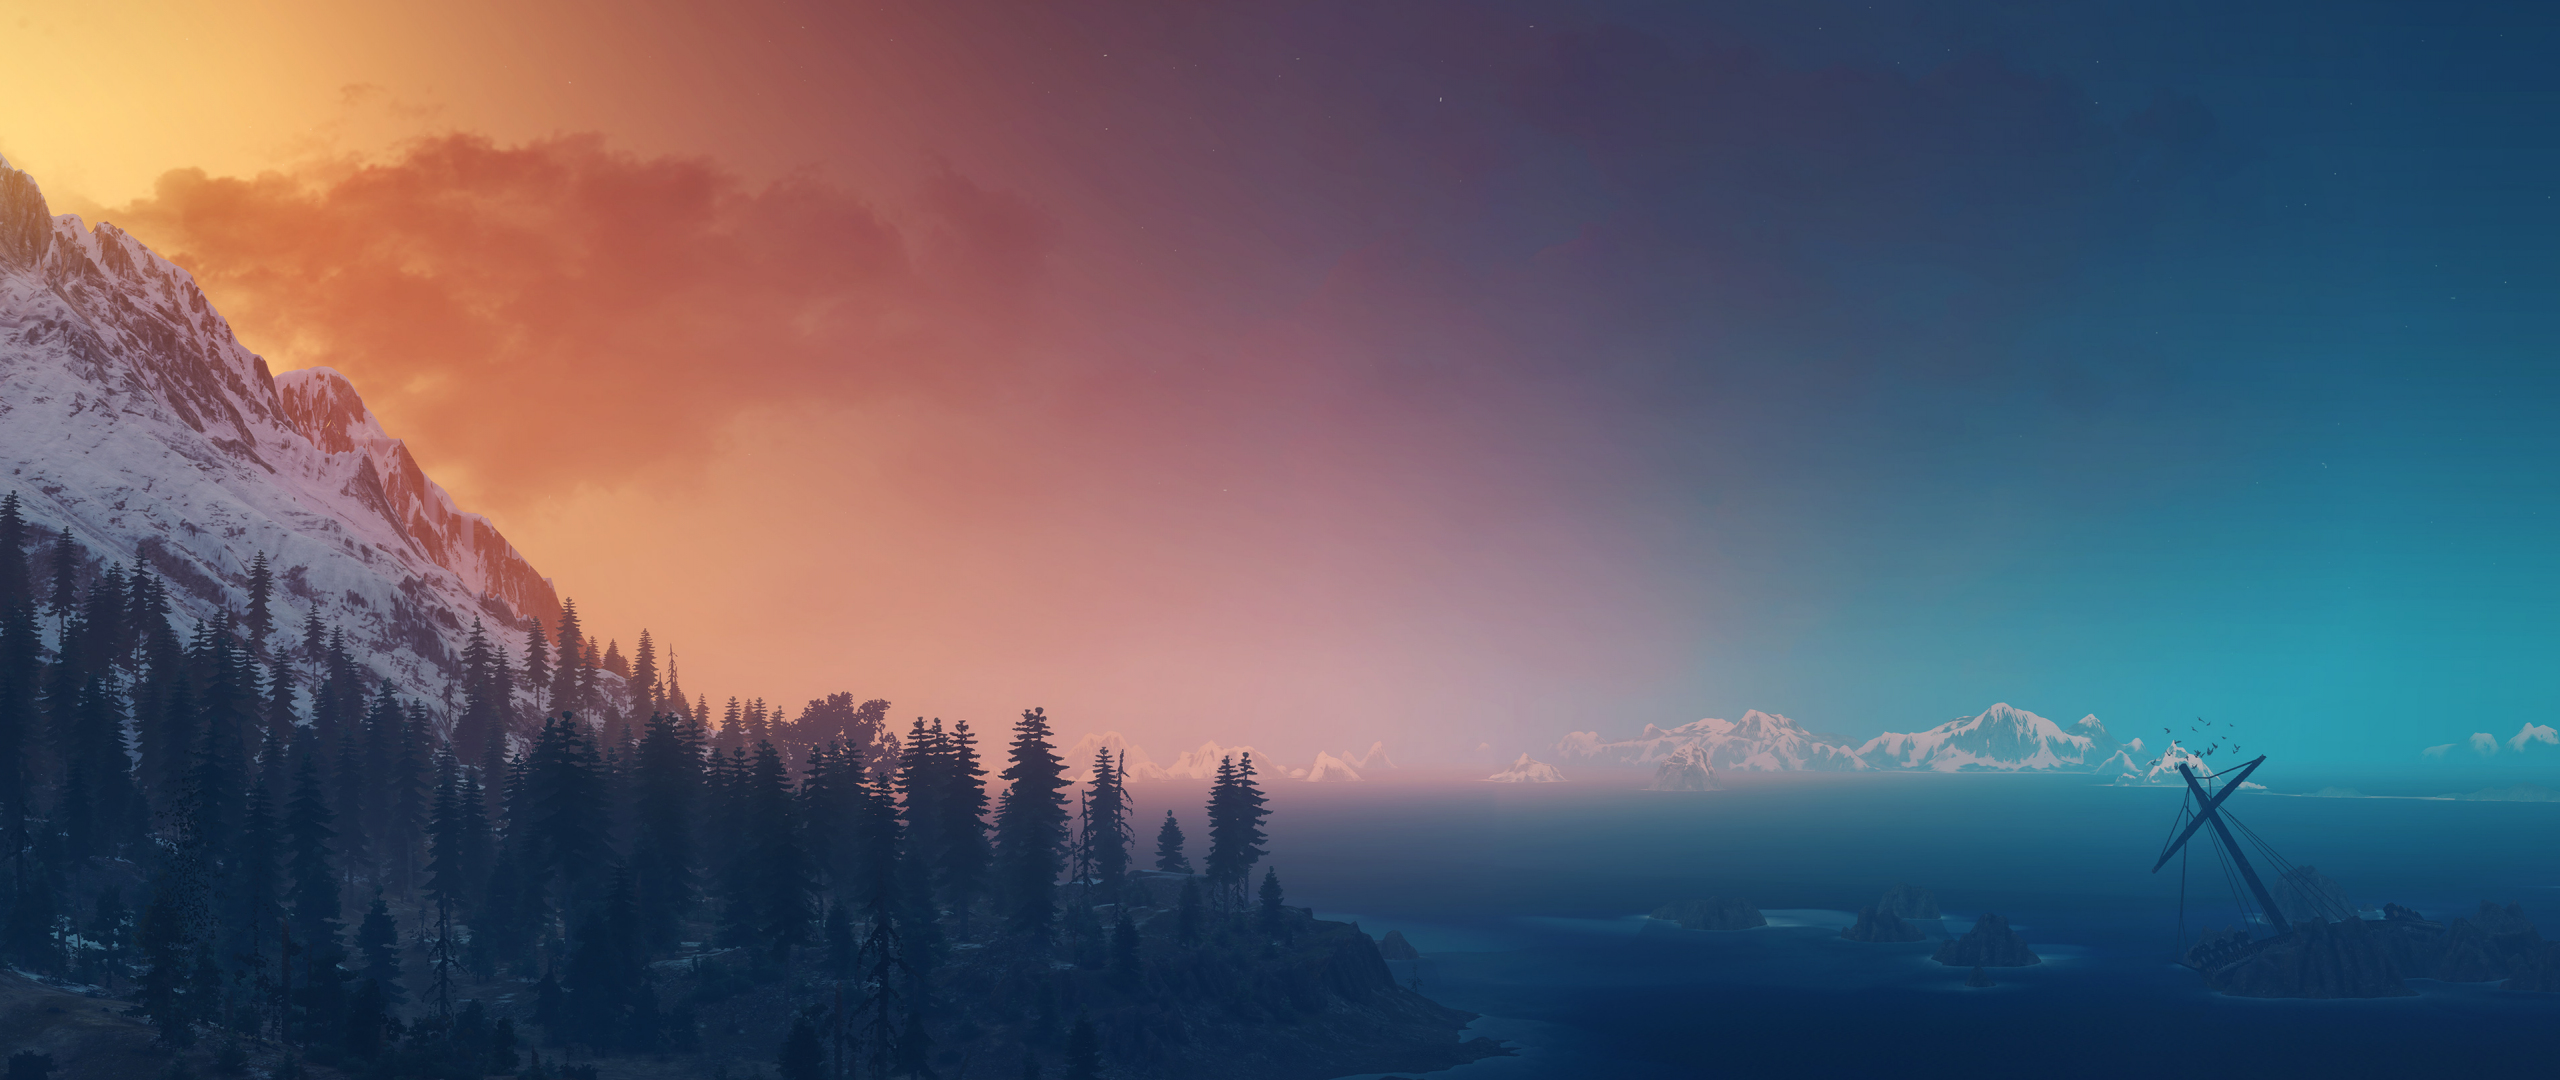 The Witcher 3: Wild Hunt, landscape, panorama, sky, 2560x1080 wallpaper